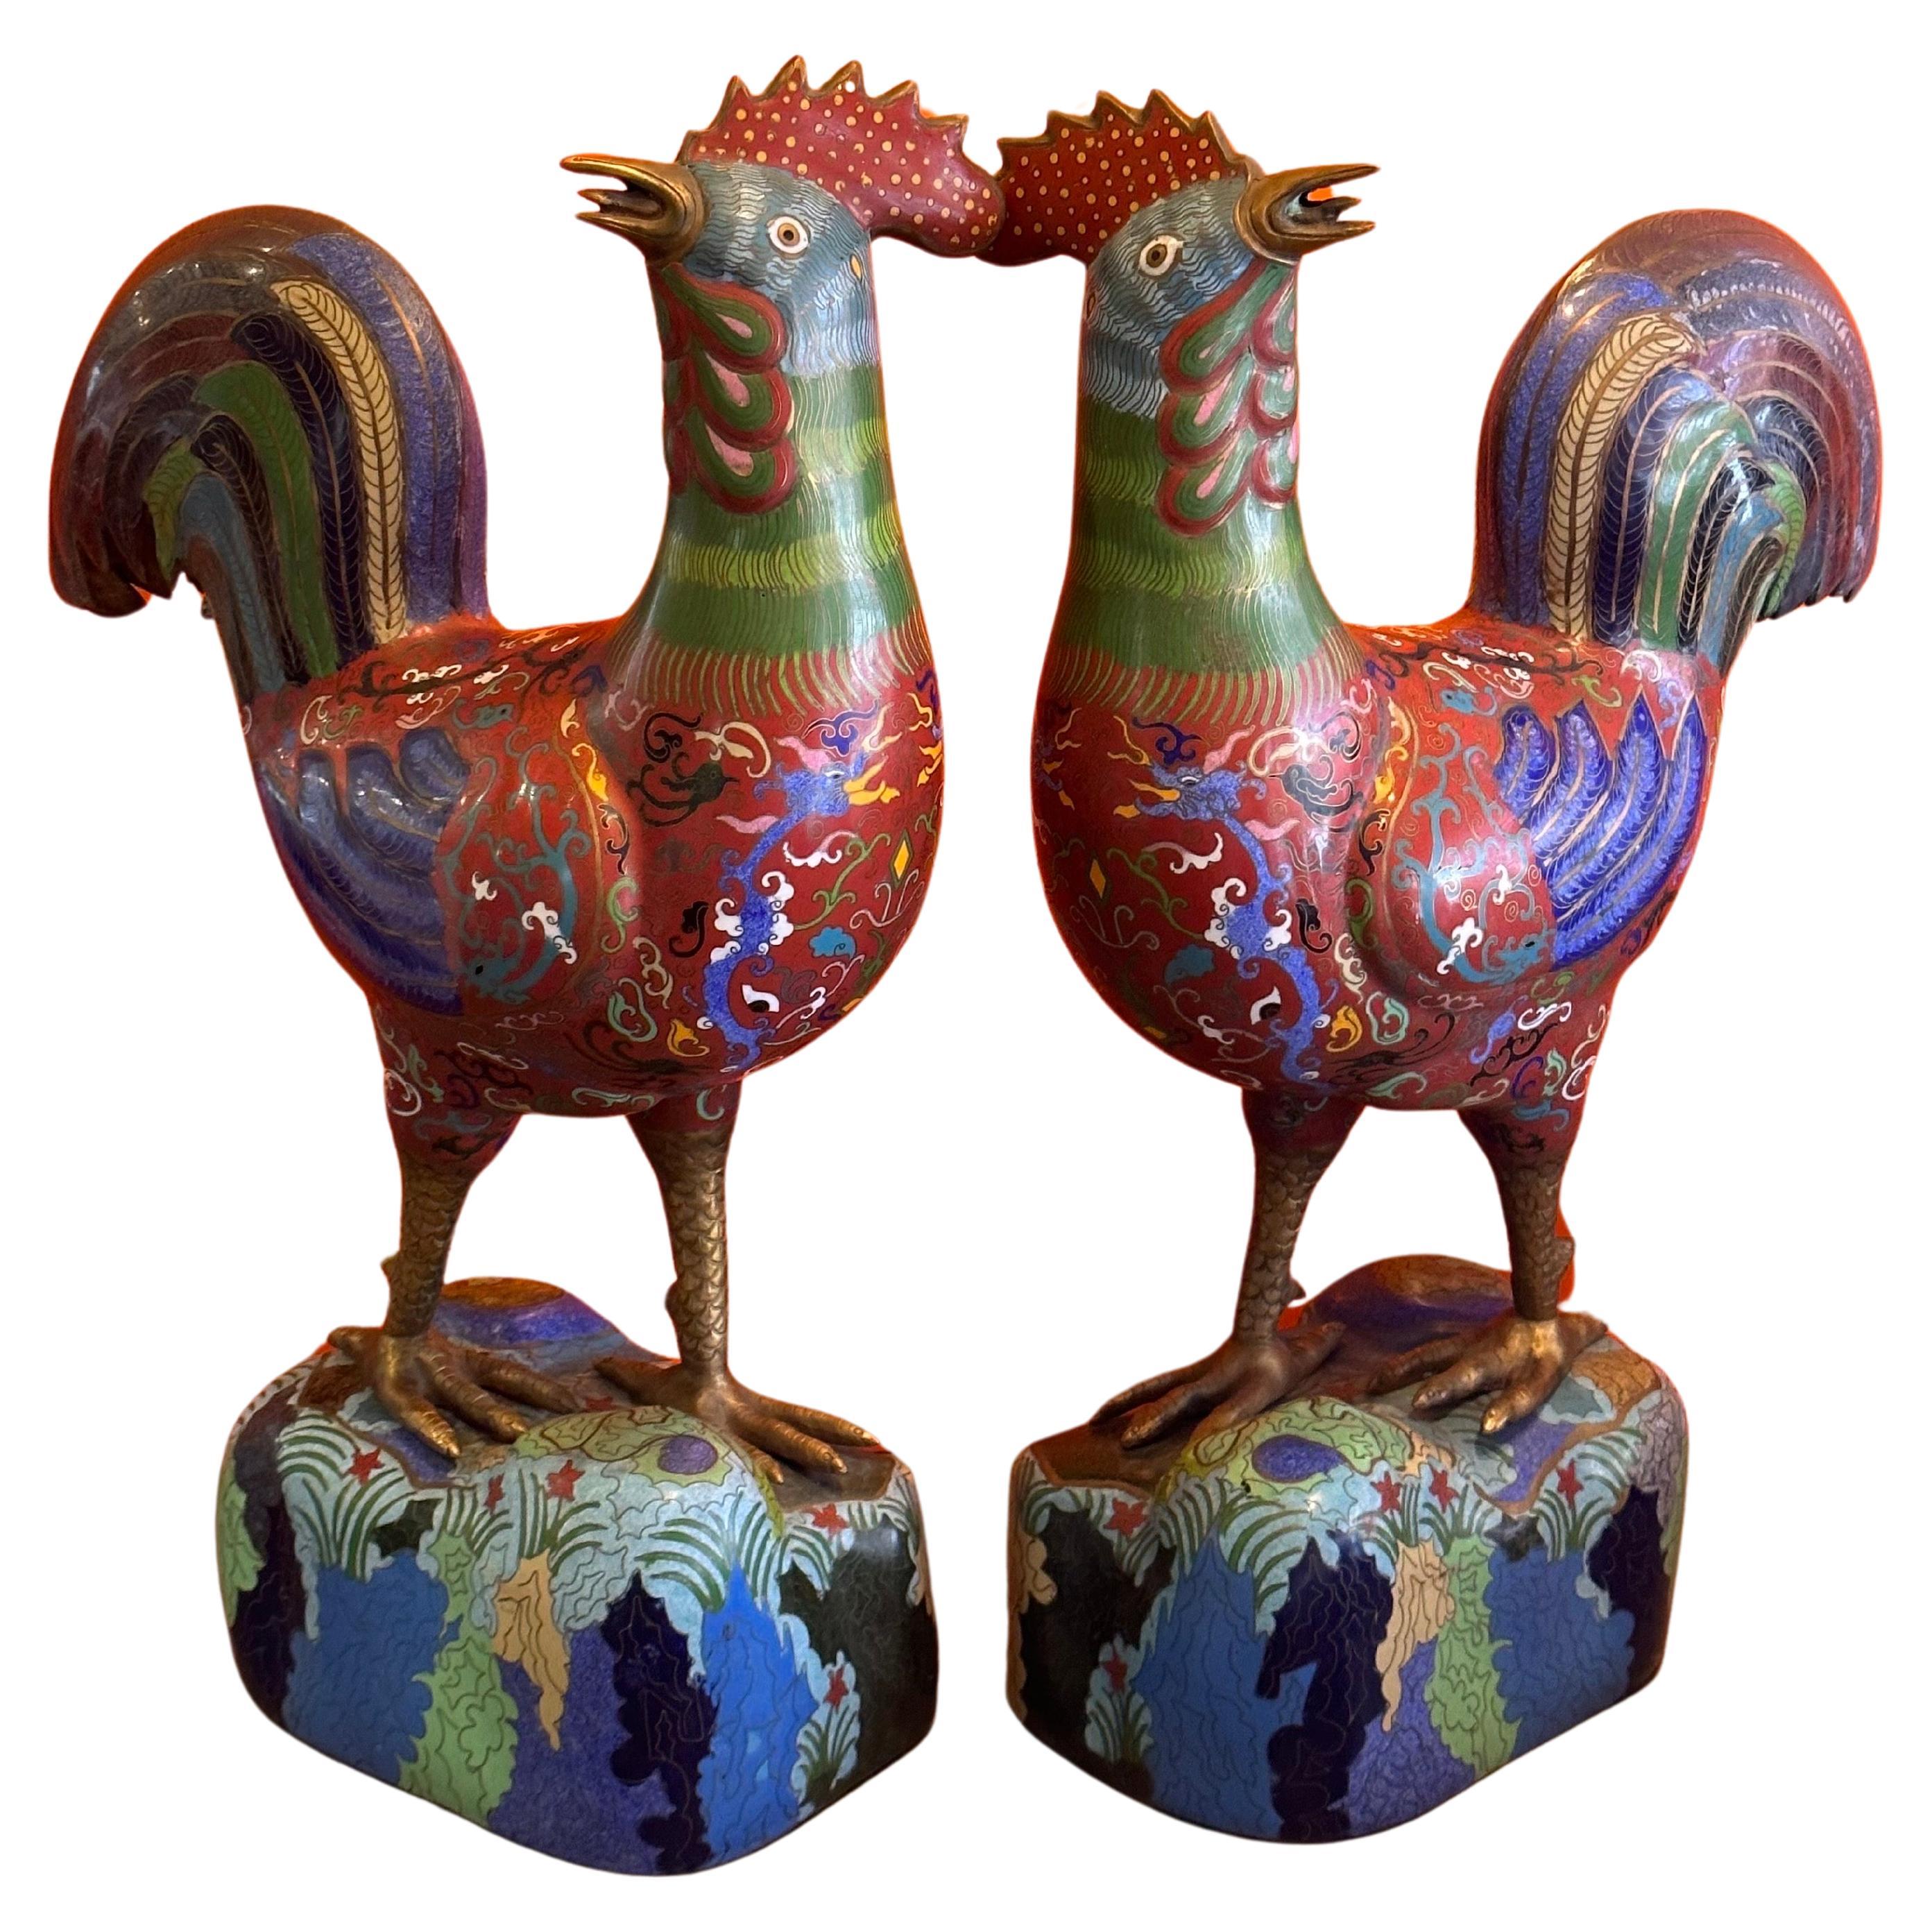 A nice vintage mirrored pair of Chinese cloisonné rooster sculptures, circa early 20th century. The sculptures are in very good condition with no dings or dents and measure 15